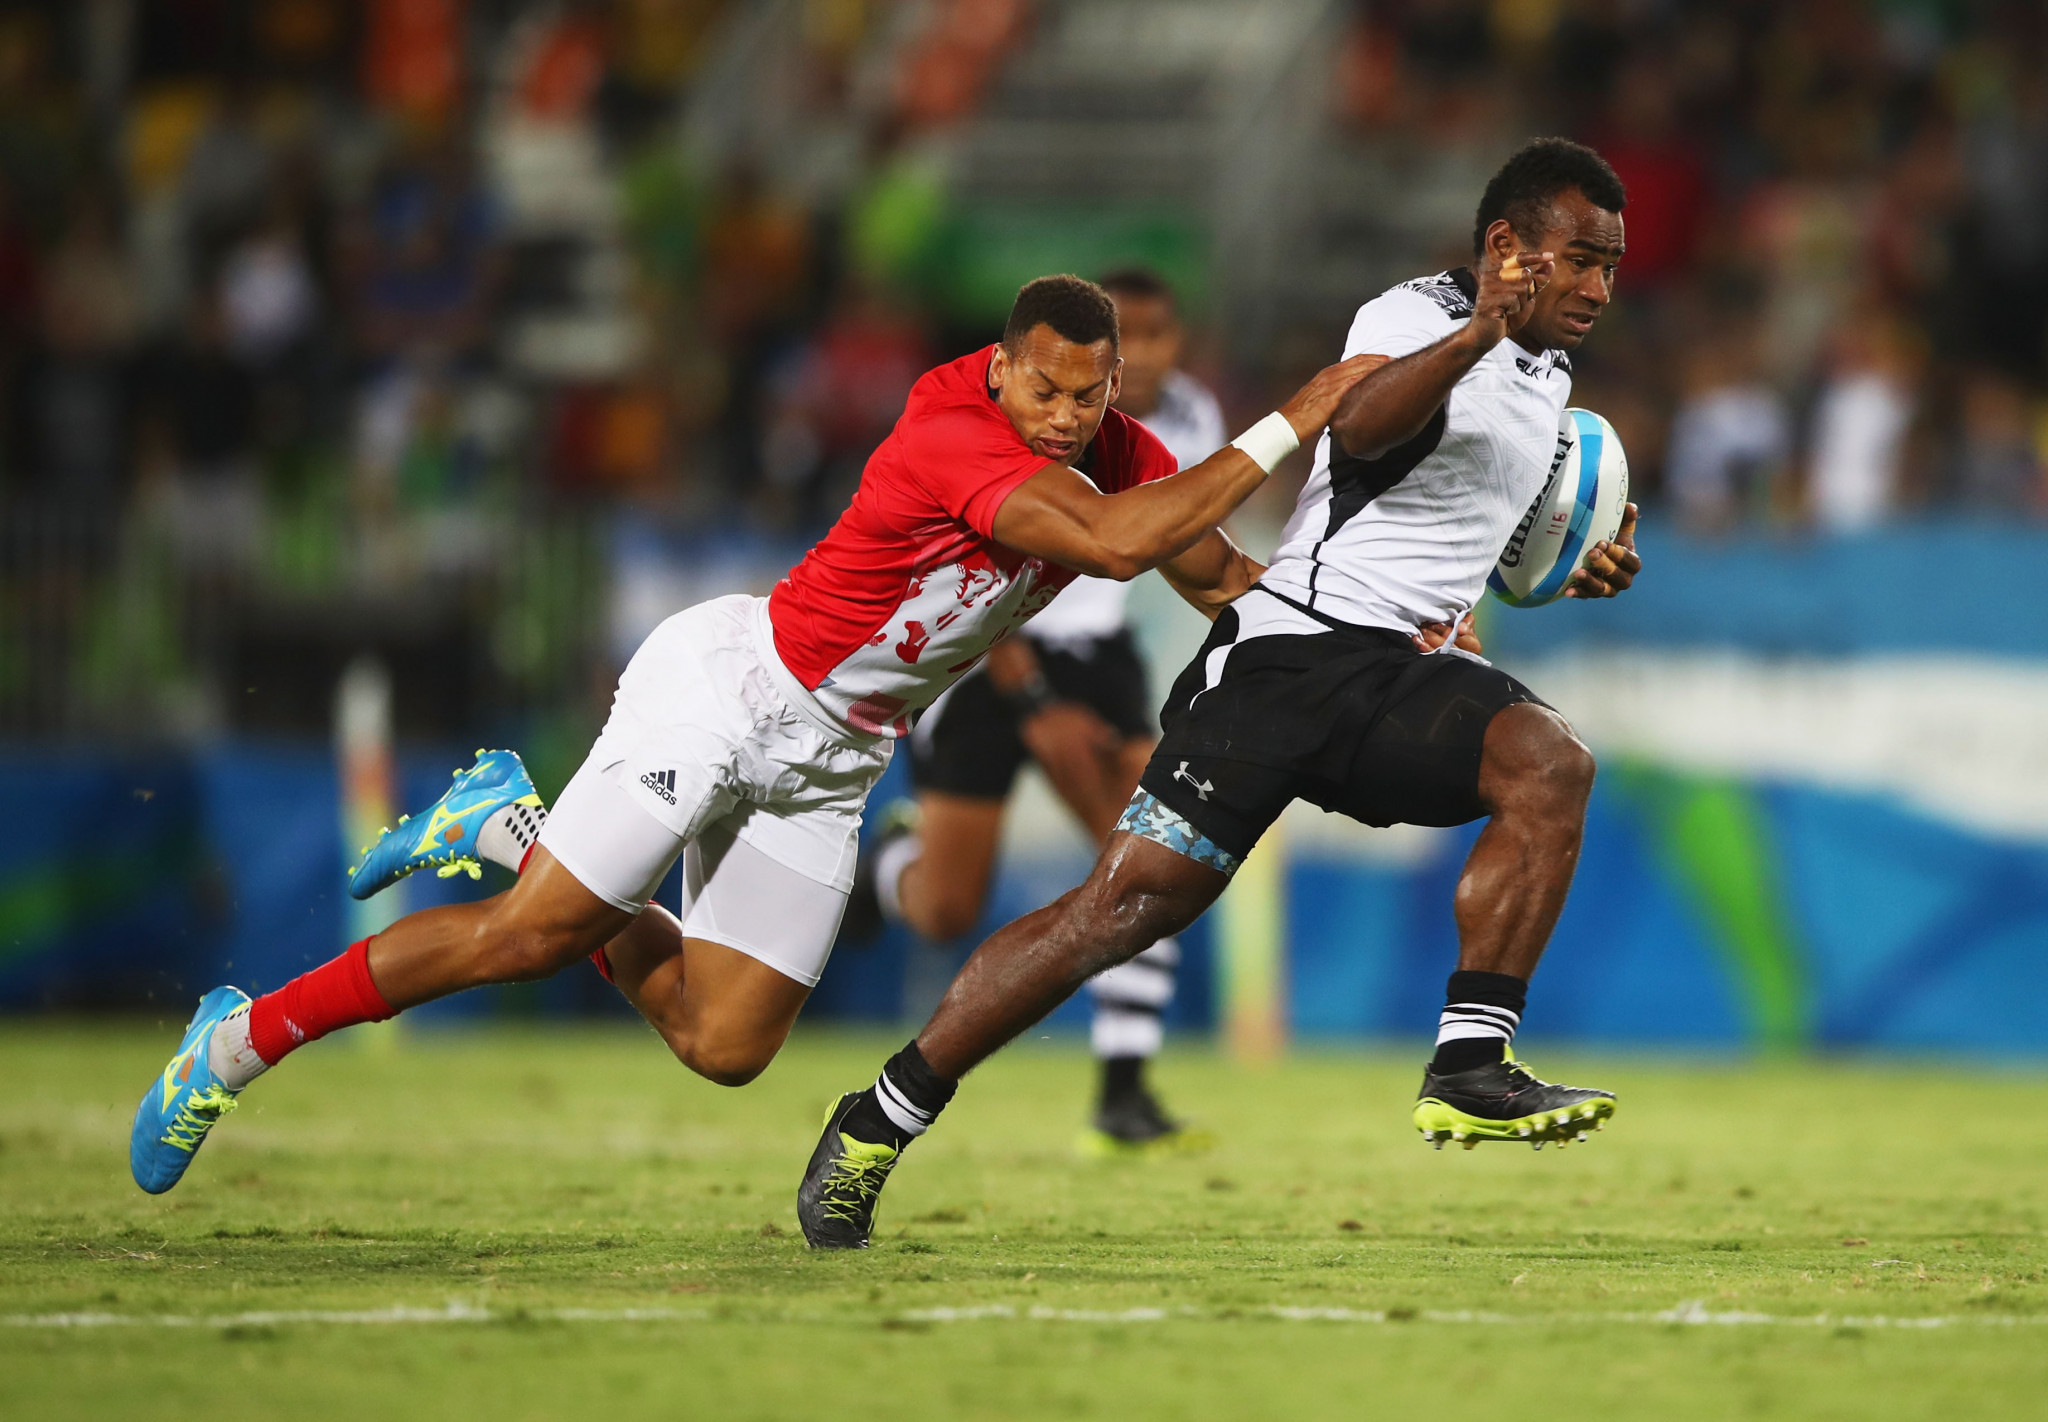 Rugby sevens is expected to be a hot ticket for Fijians keen to attend Tokyo 2020 ©Getty Images